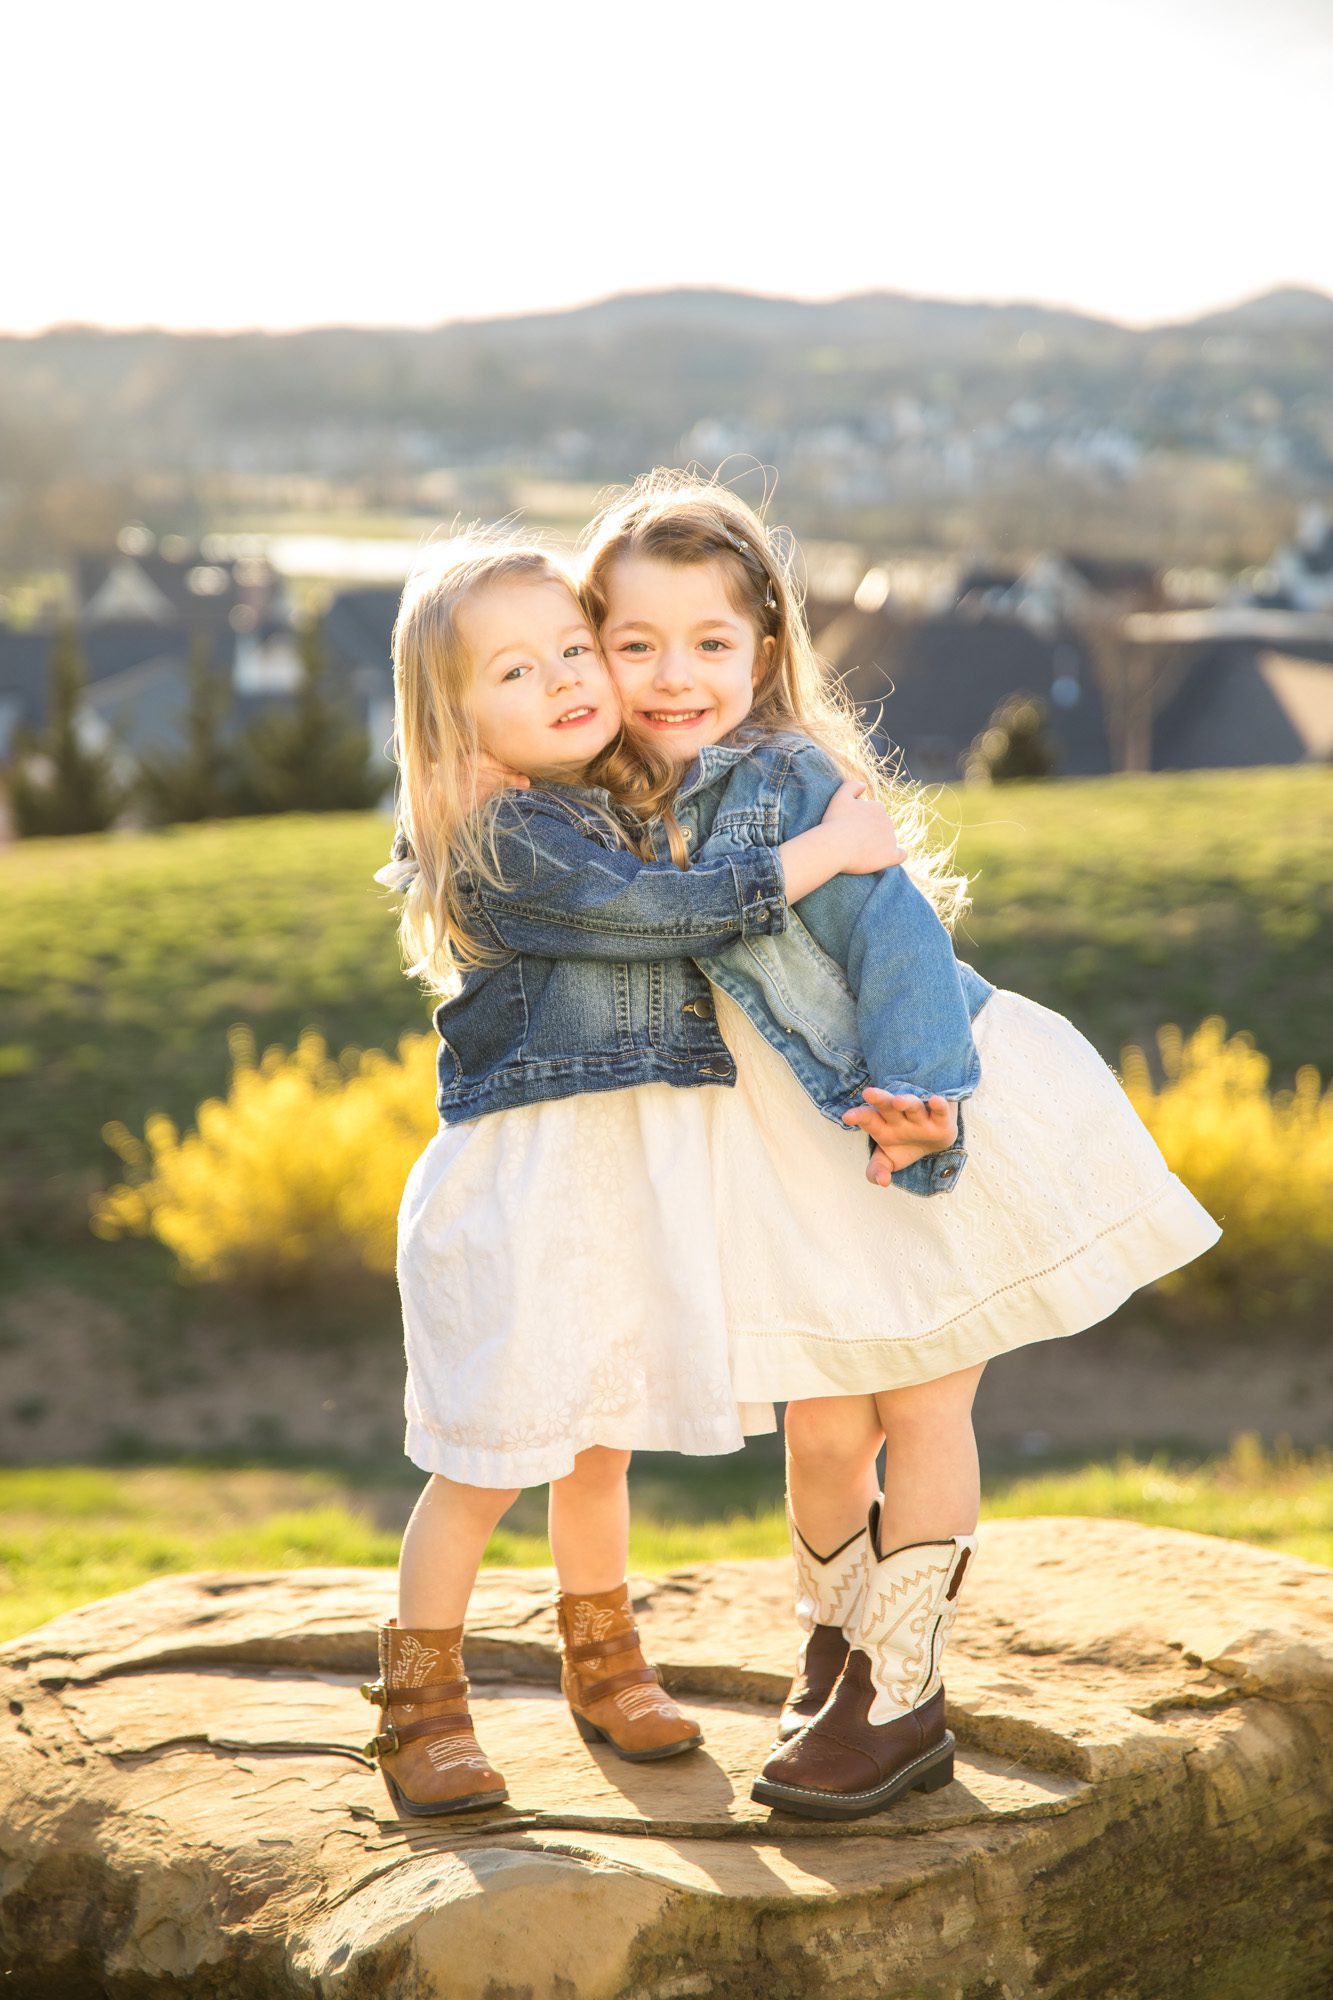 Siblings sisters magic hour photos, Children wardrobe ideas for family portrait 